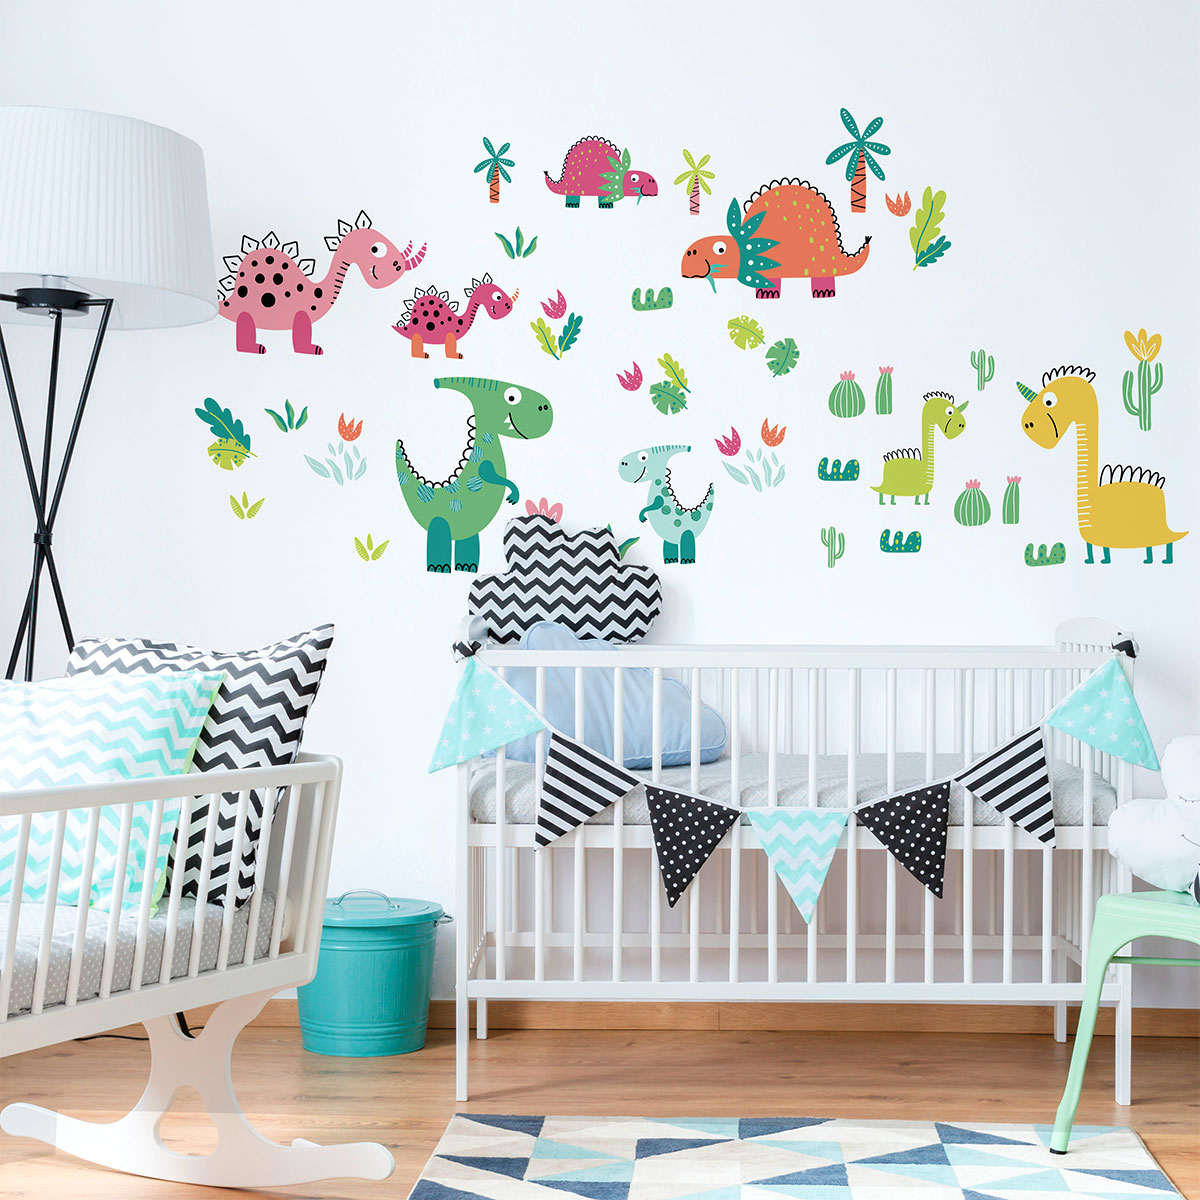 Wall decals dinosaurs, palm trees and cacti